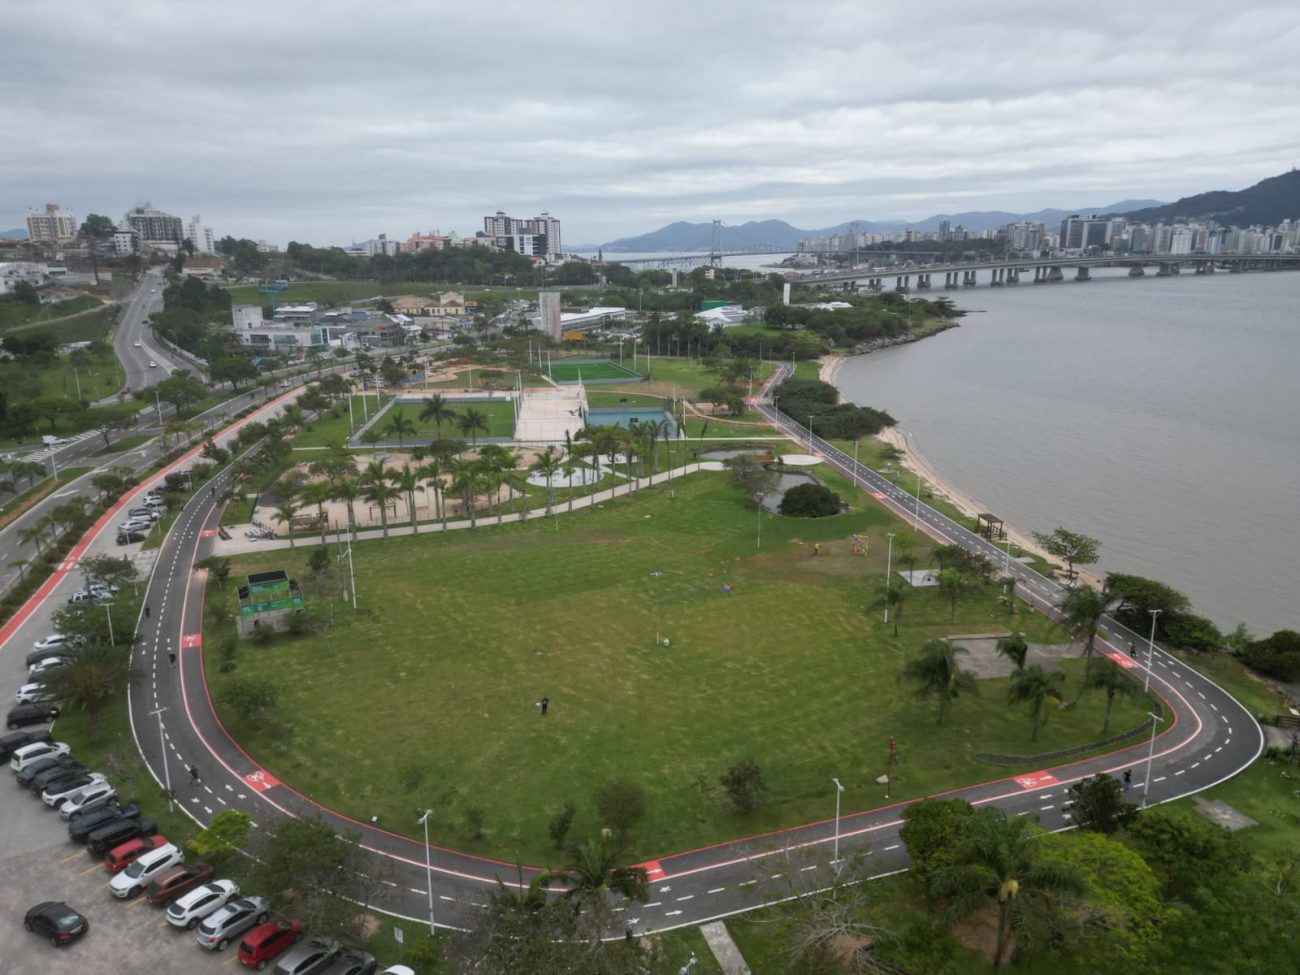 Coqueiros Park reopens after renovation - Leo Russo/PMF